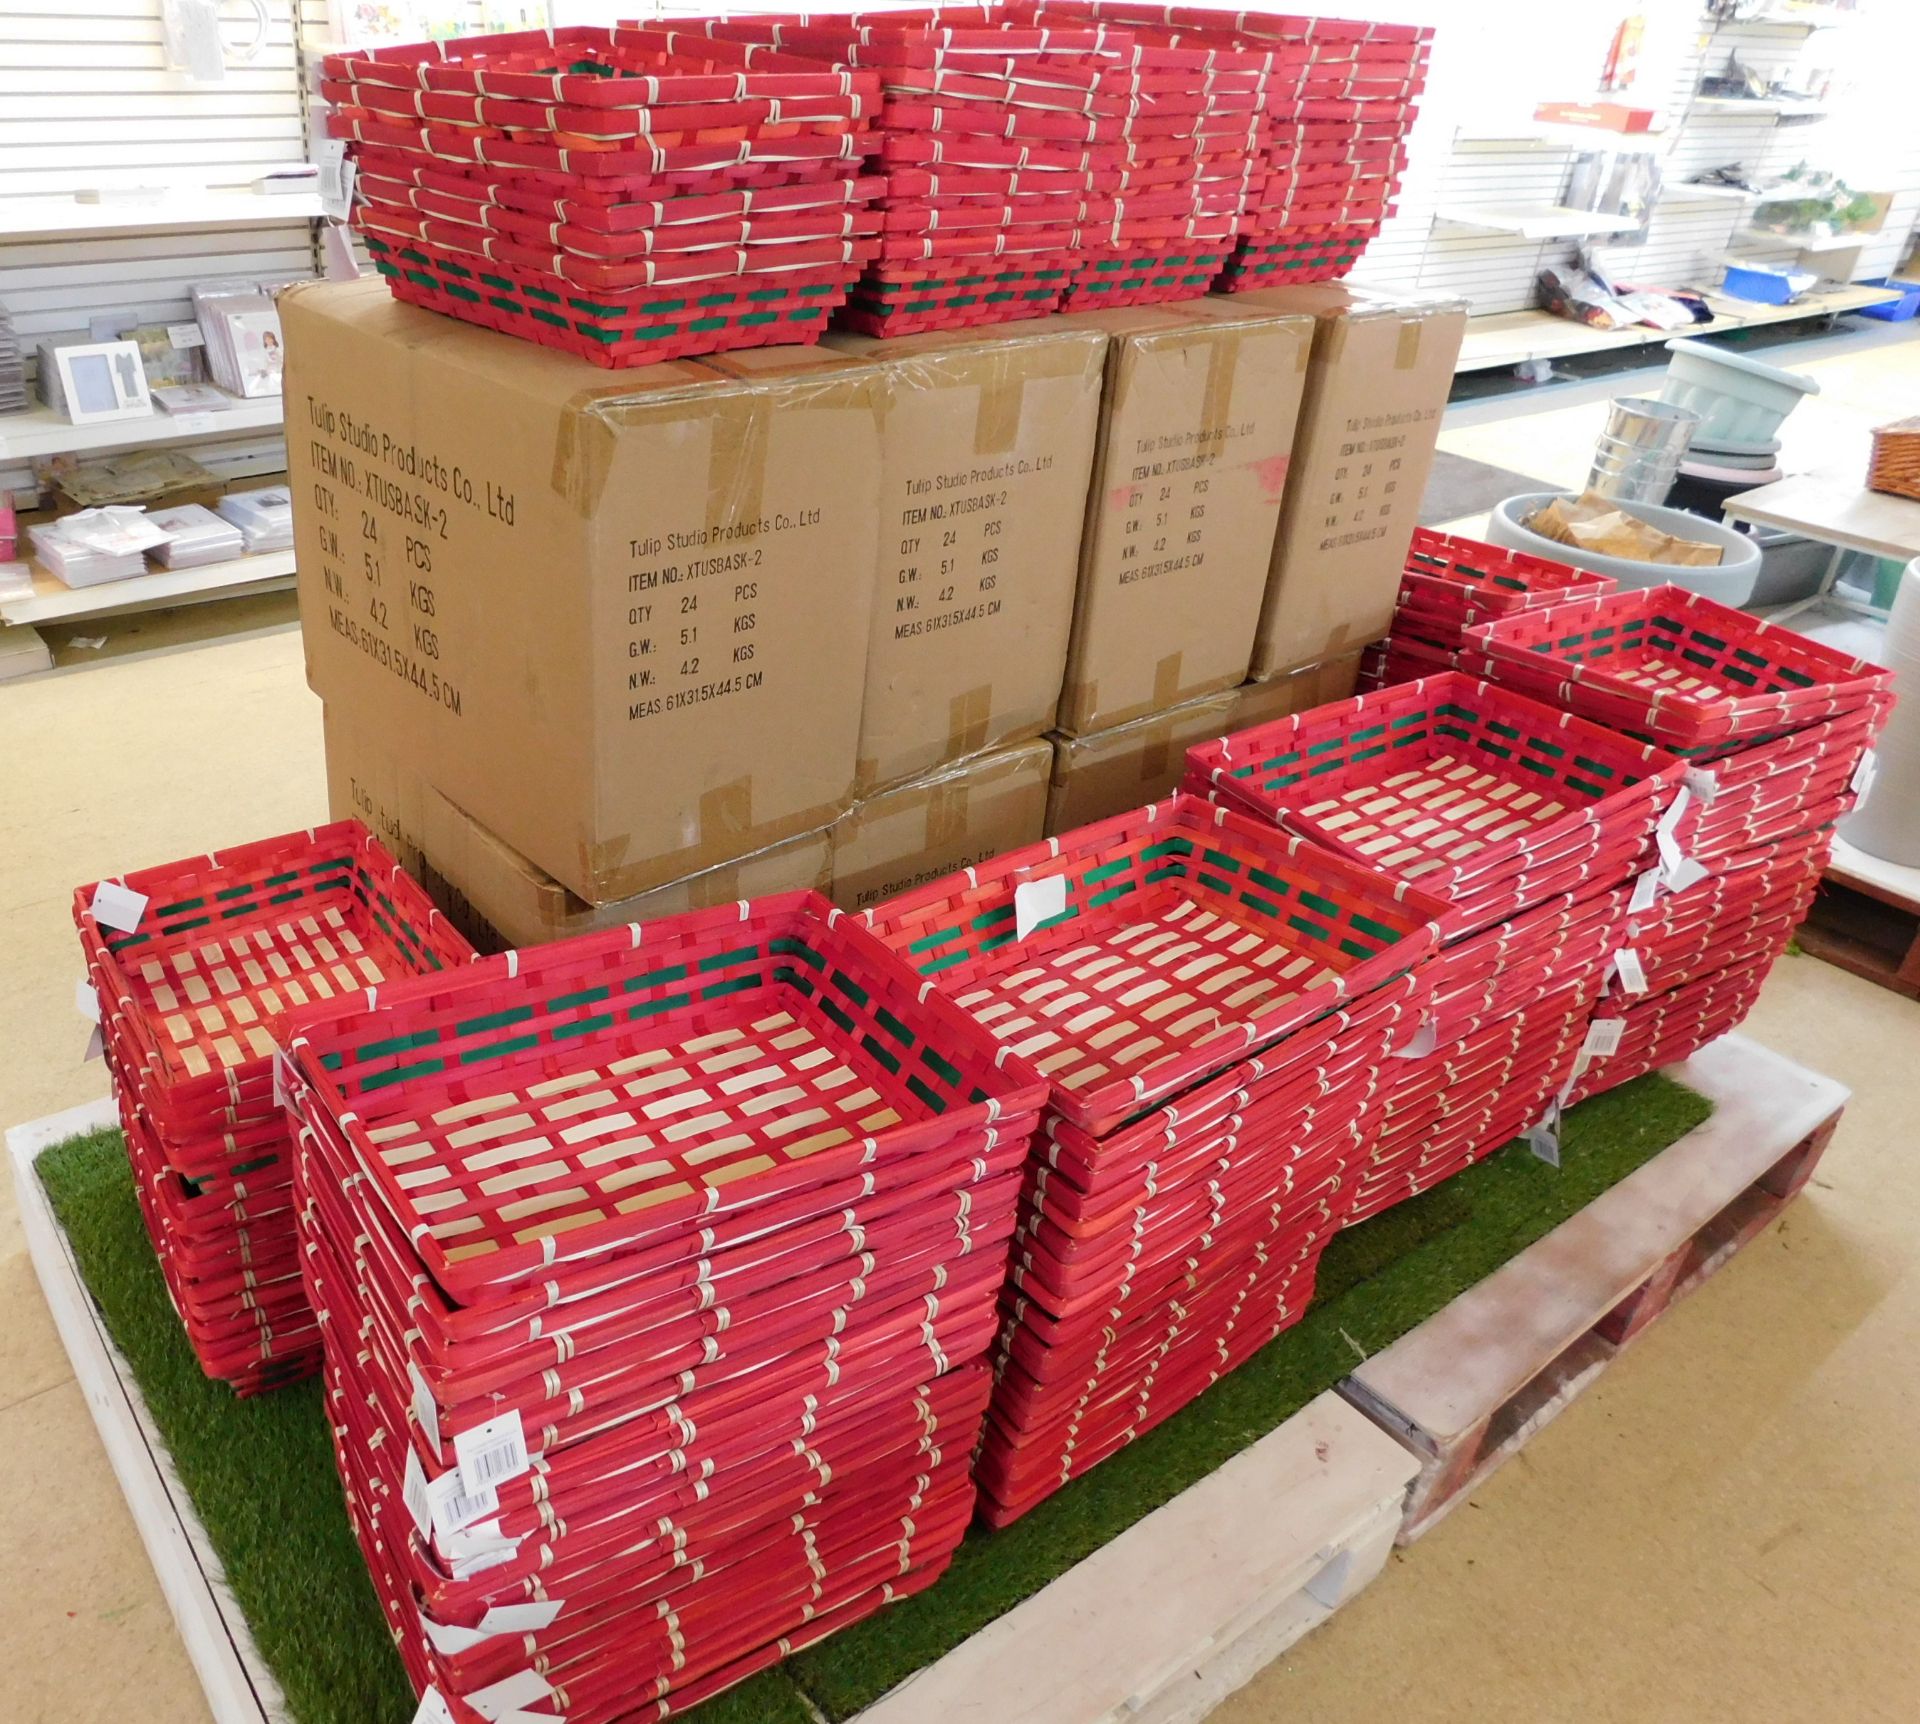 Contents of Pallet to Include Approximately 280 Wicker Display Baskets (Location Bury. Please See